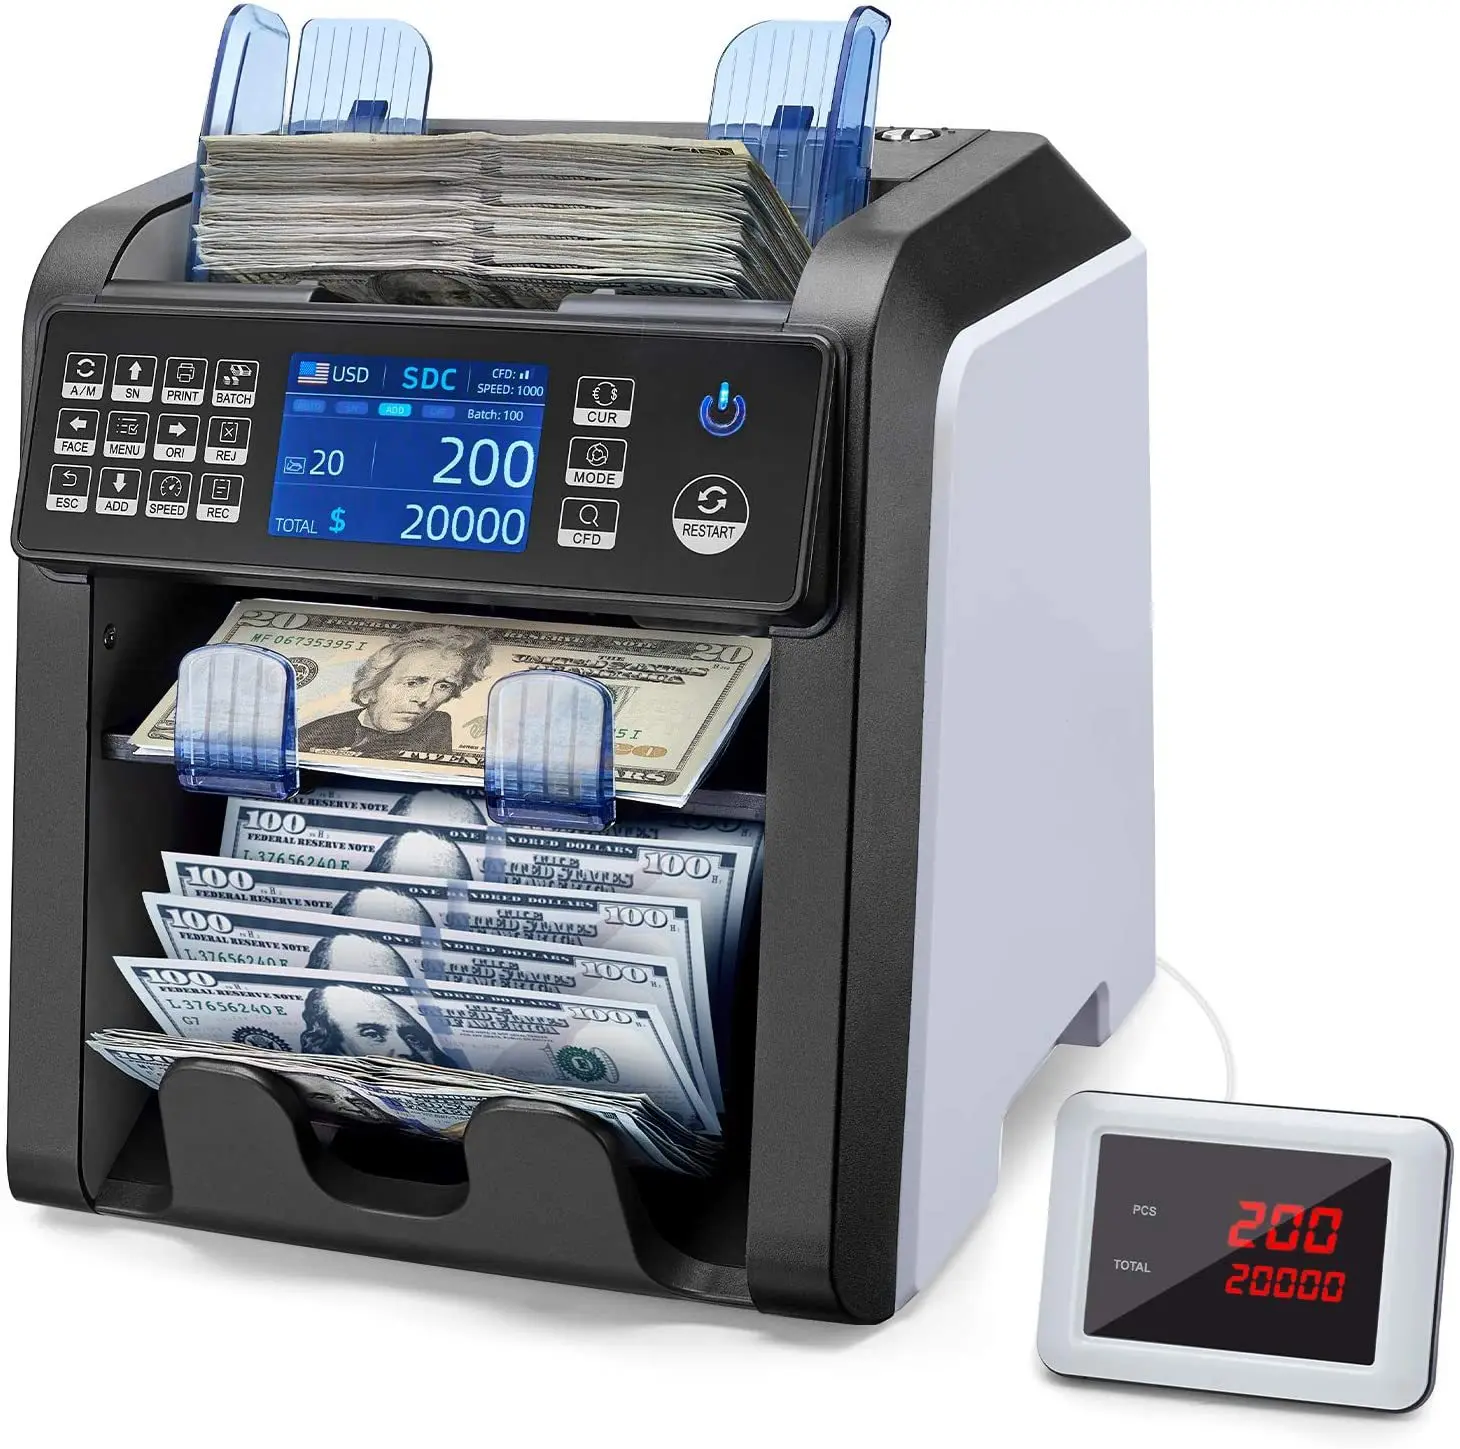 

AL-950 Dual CIS Banknote Sorter Fitness Mix Value Money Counter Counterfeit Bill Counter